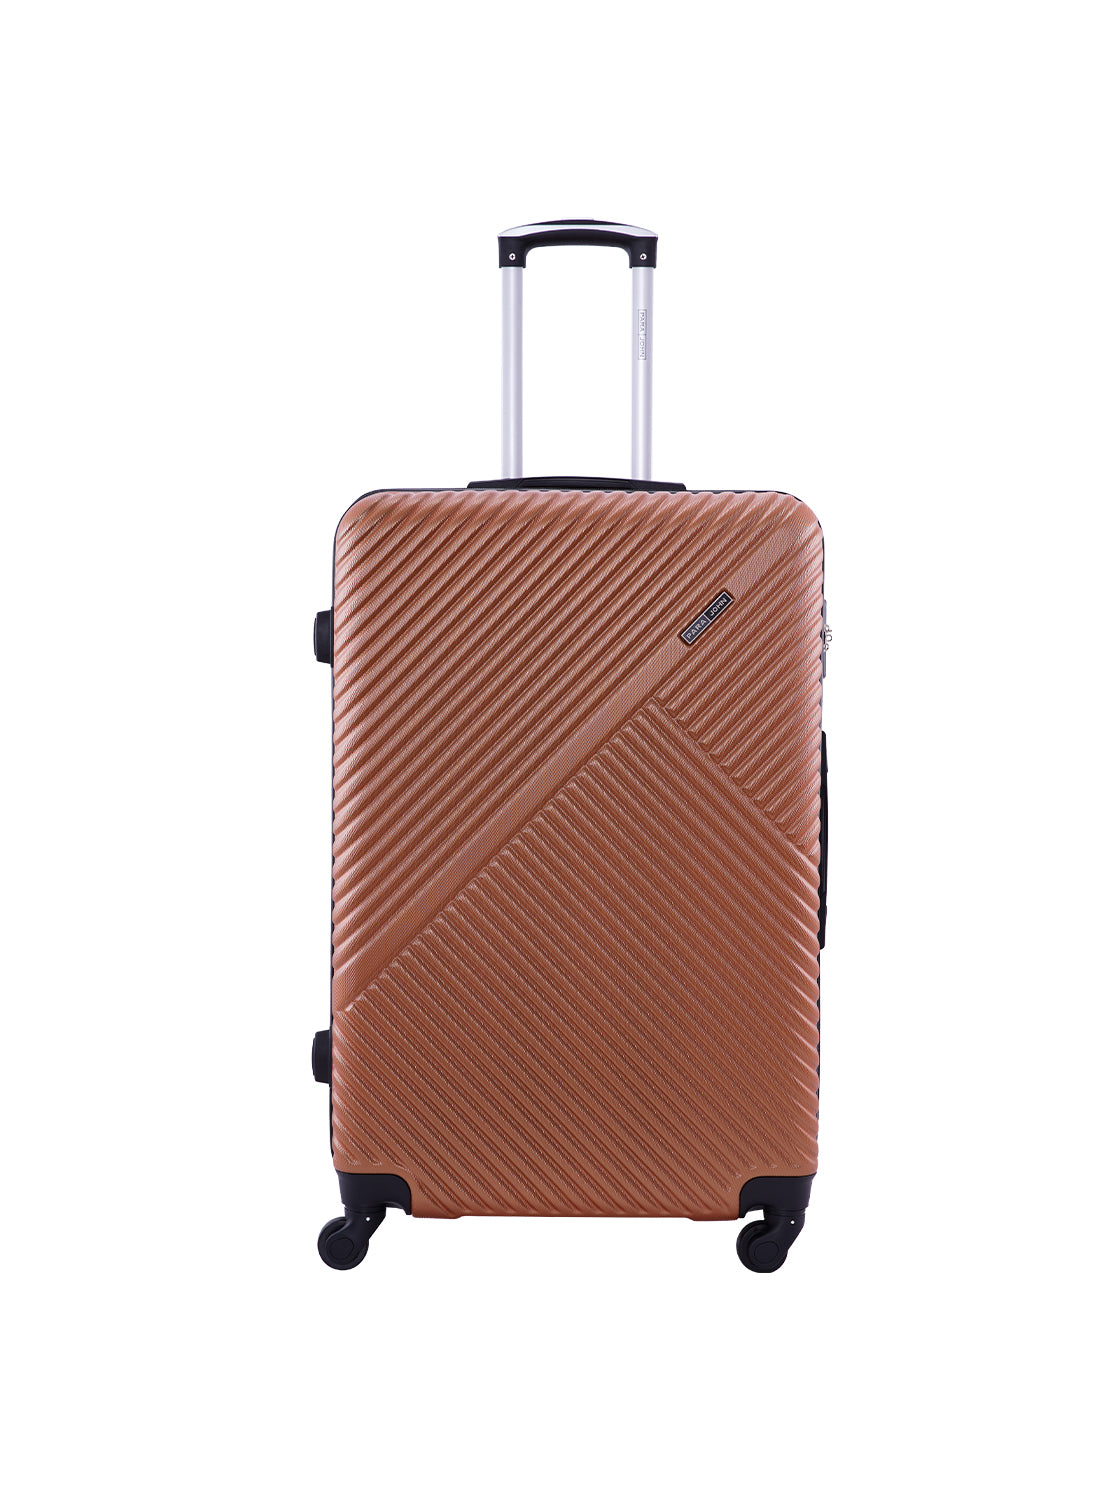 ABS Hardside Spinner Check In Large Luggage Trolley 28 Inch